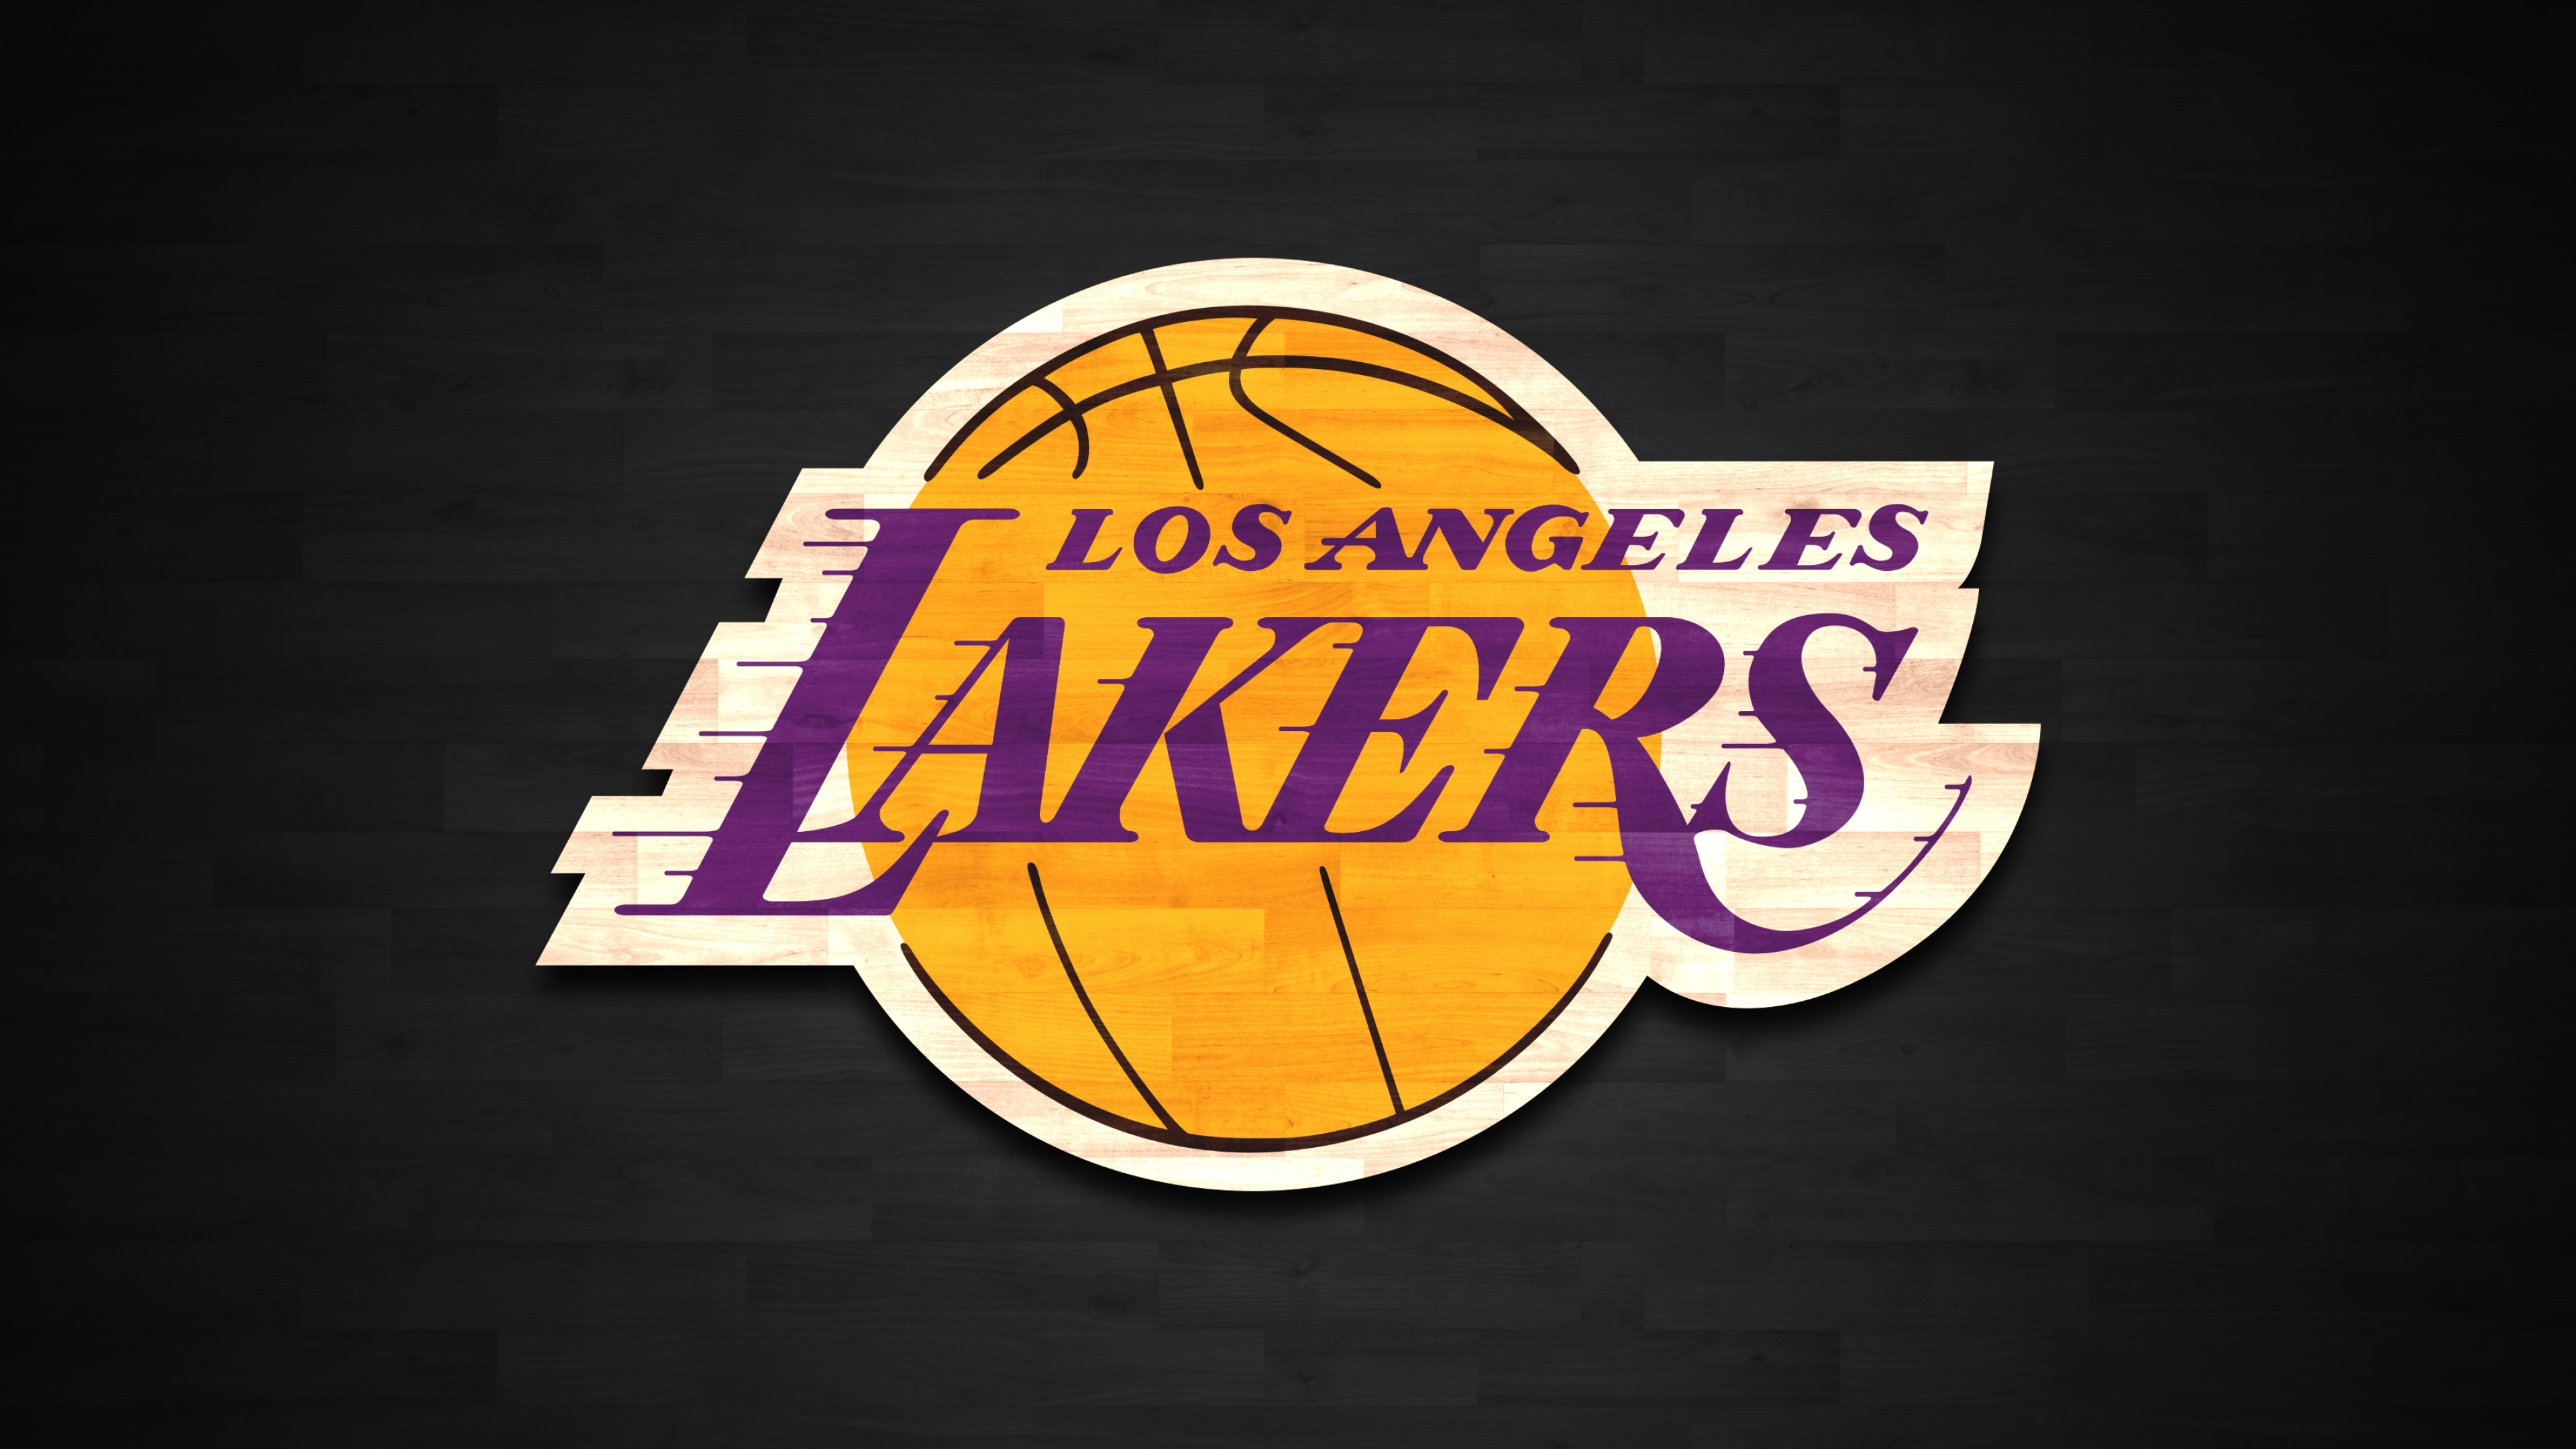 Los Angeles Lakers: The team compete in the NBA as a member of the league's Western Conference Pacific Division. 3840x2160 4K Background.